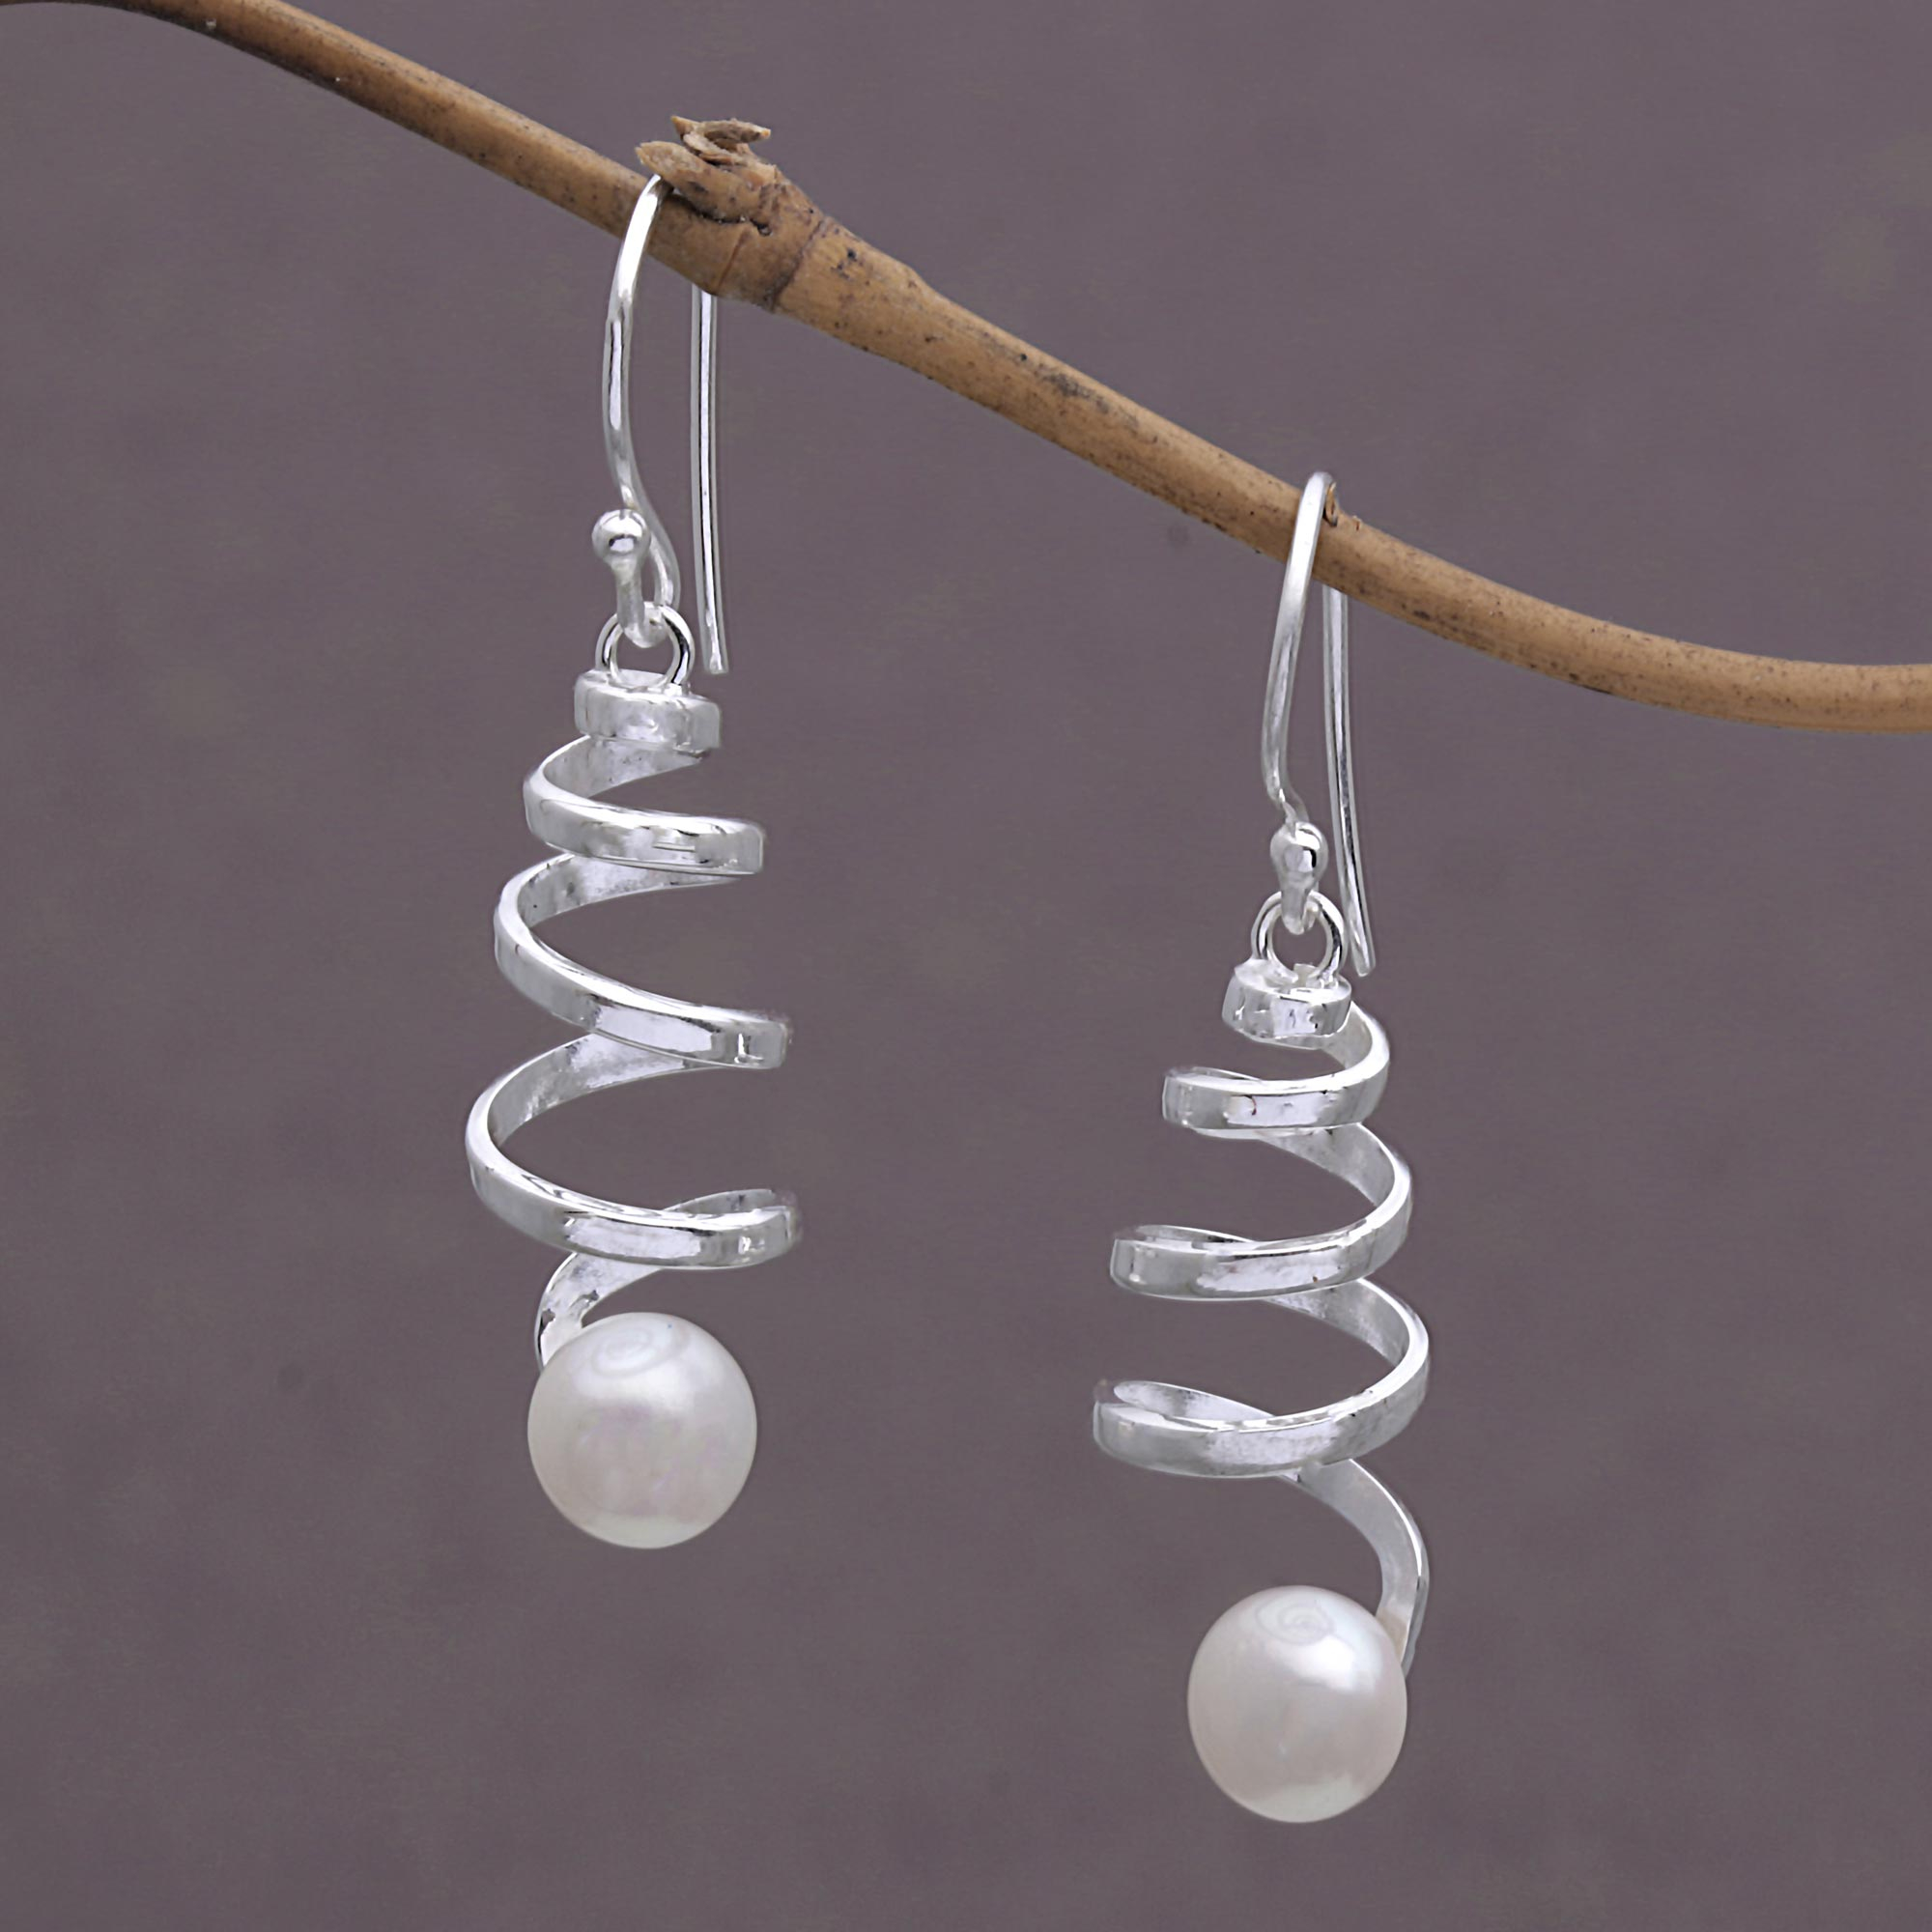 Silver leaf and pearl dangly earrings handmade sterling silver textured leaves with a pink fresh water cultured pearl on hook wires